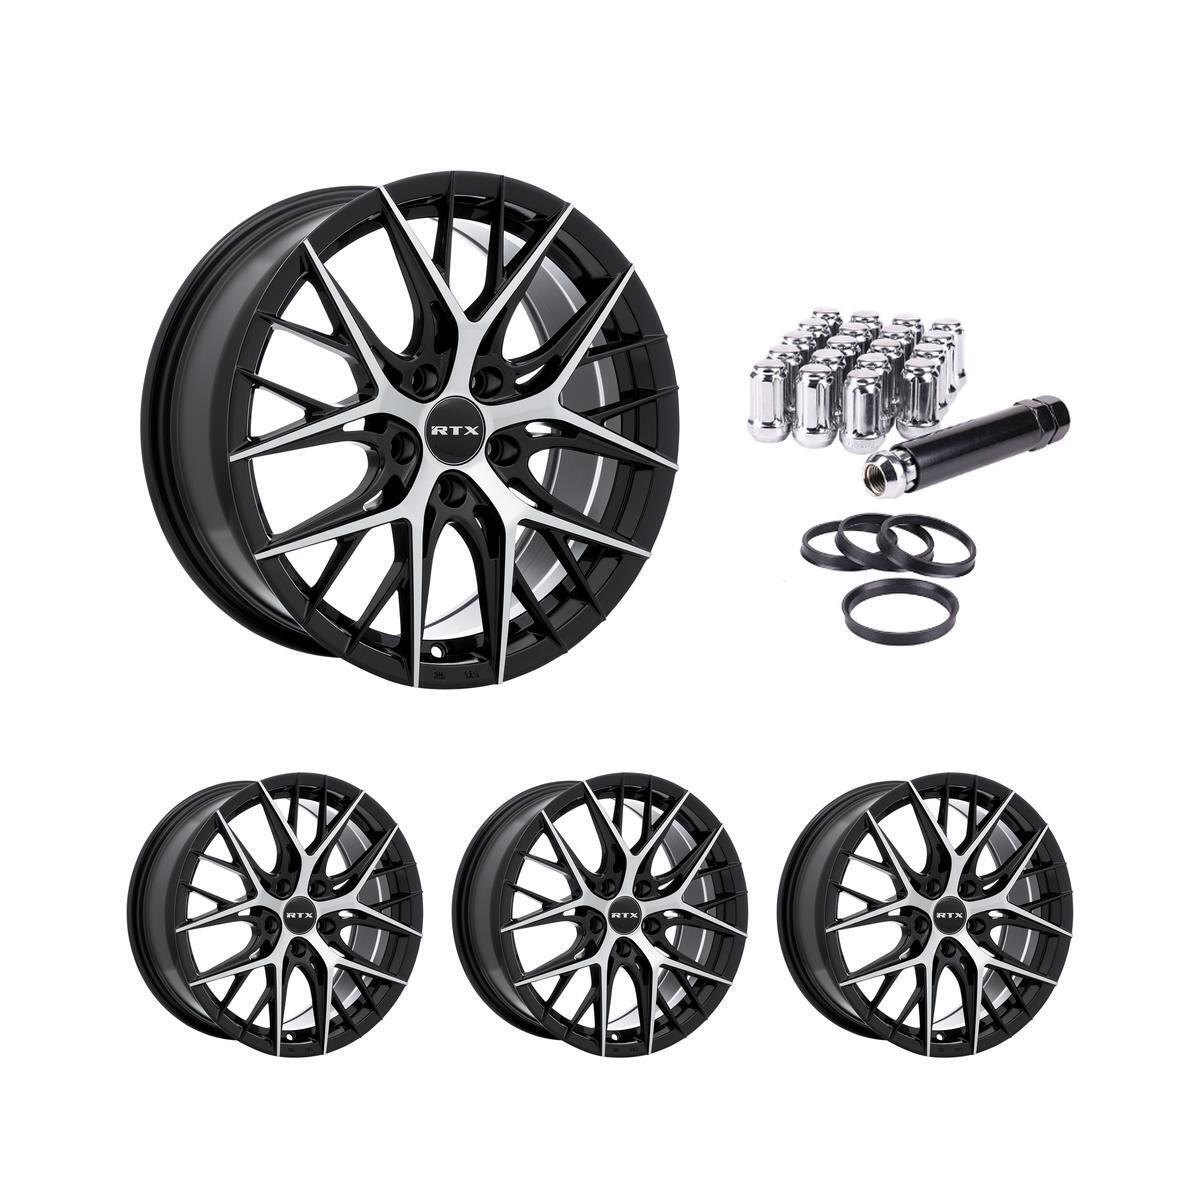 Set of 4 RTX Valkyrie Black Alloy Wheel Rims for Acura P37949 18x8 18 Inch 